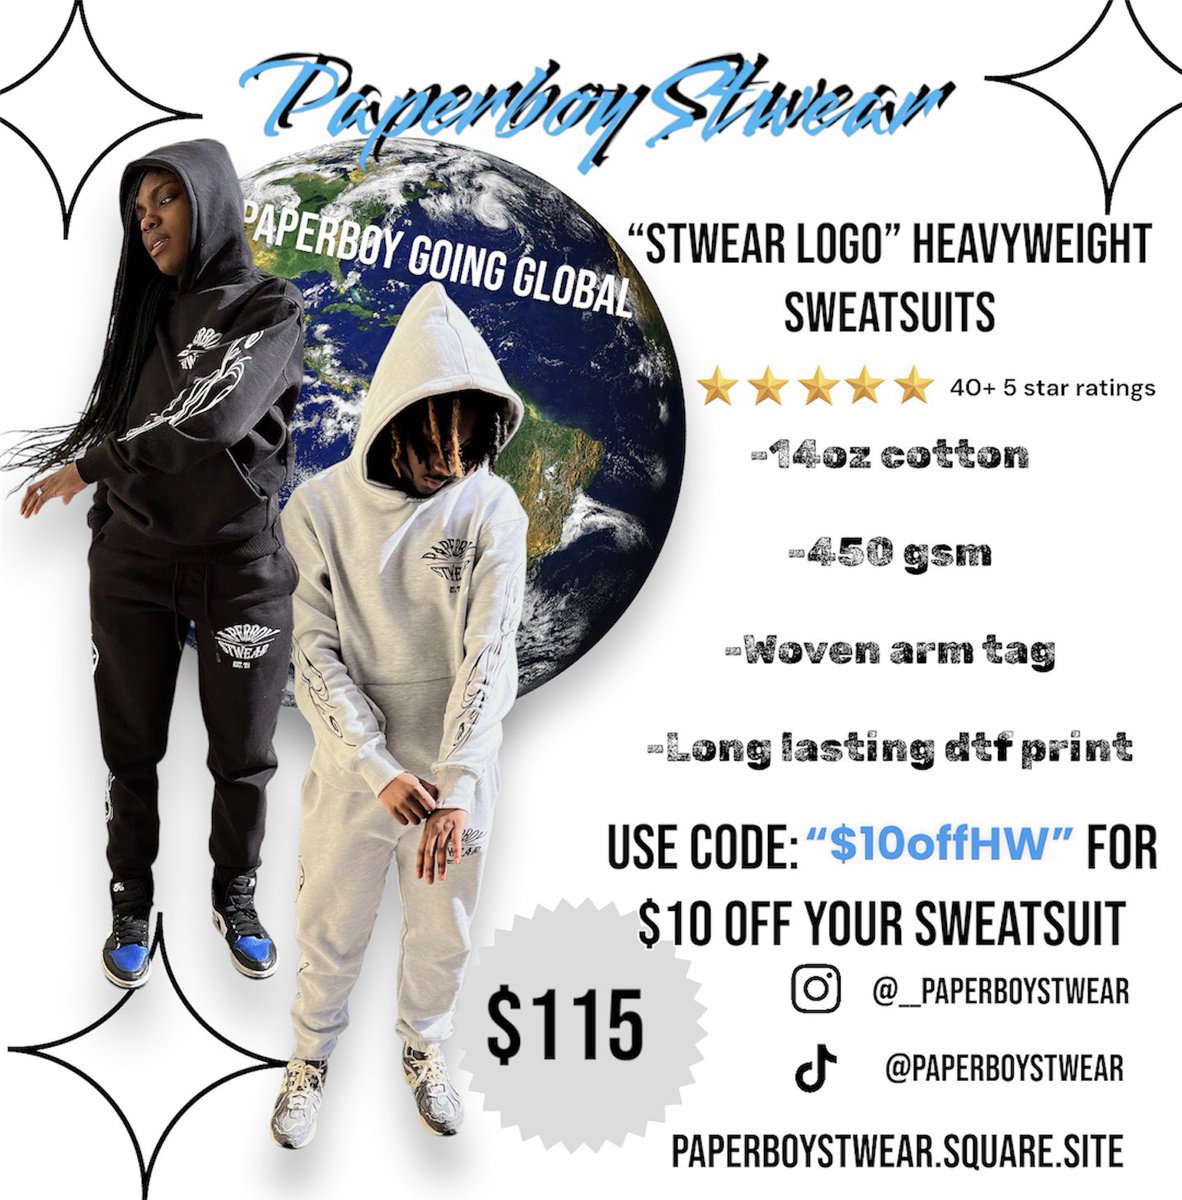 What are you waiting for? 
Over 40+ 5 star ratings🔥🔥

paperboystwear.square.site/product/paperb…

#clothingbrand #MensFashion #Menswear #MaleStreetwear #MensFashionTeam #MensFashionApparel #MensFashionTrends #BestOfStreetwear #StreetwearCulture #blackownedbusiness #supportblackbusiness 
#Paperboy